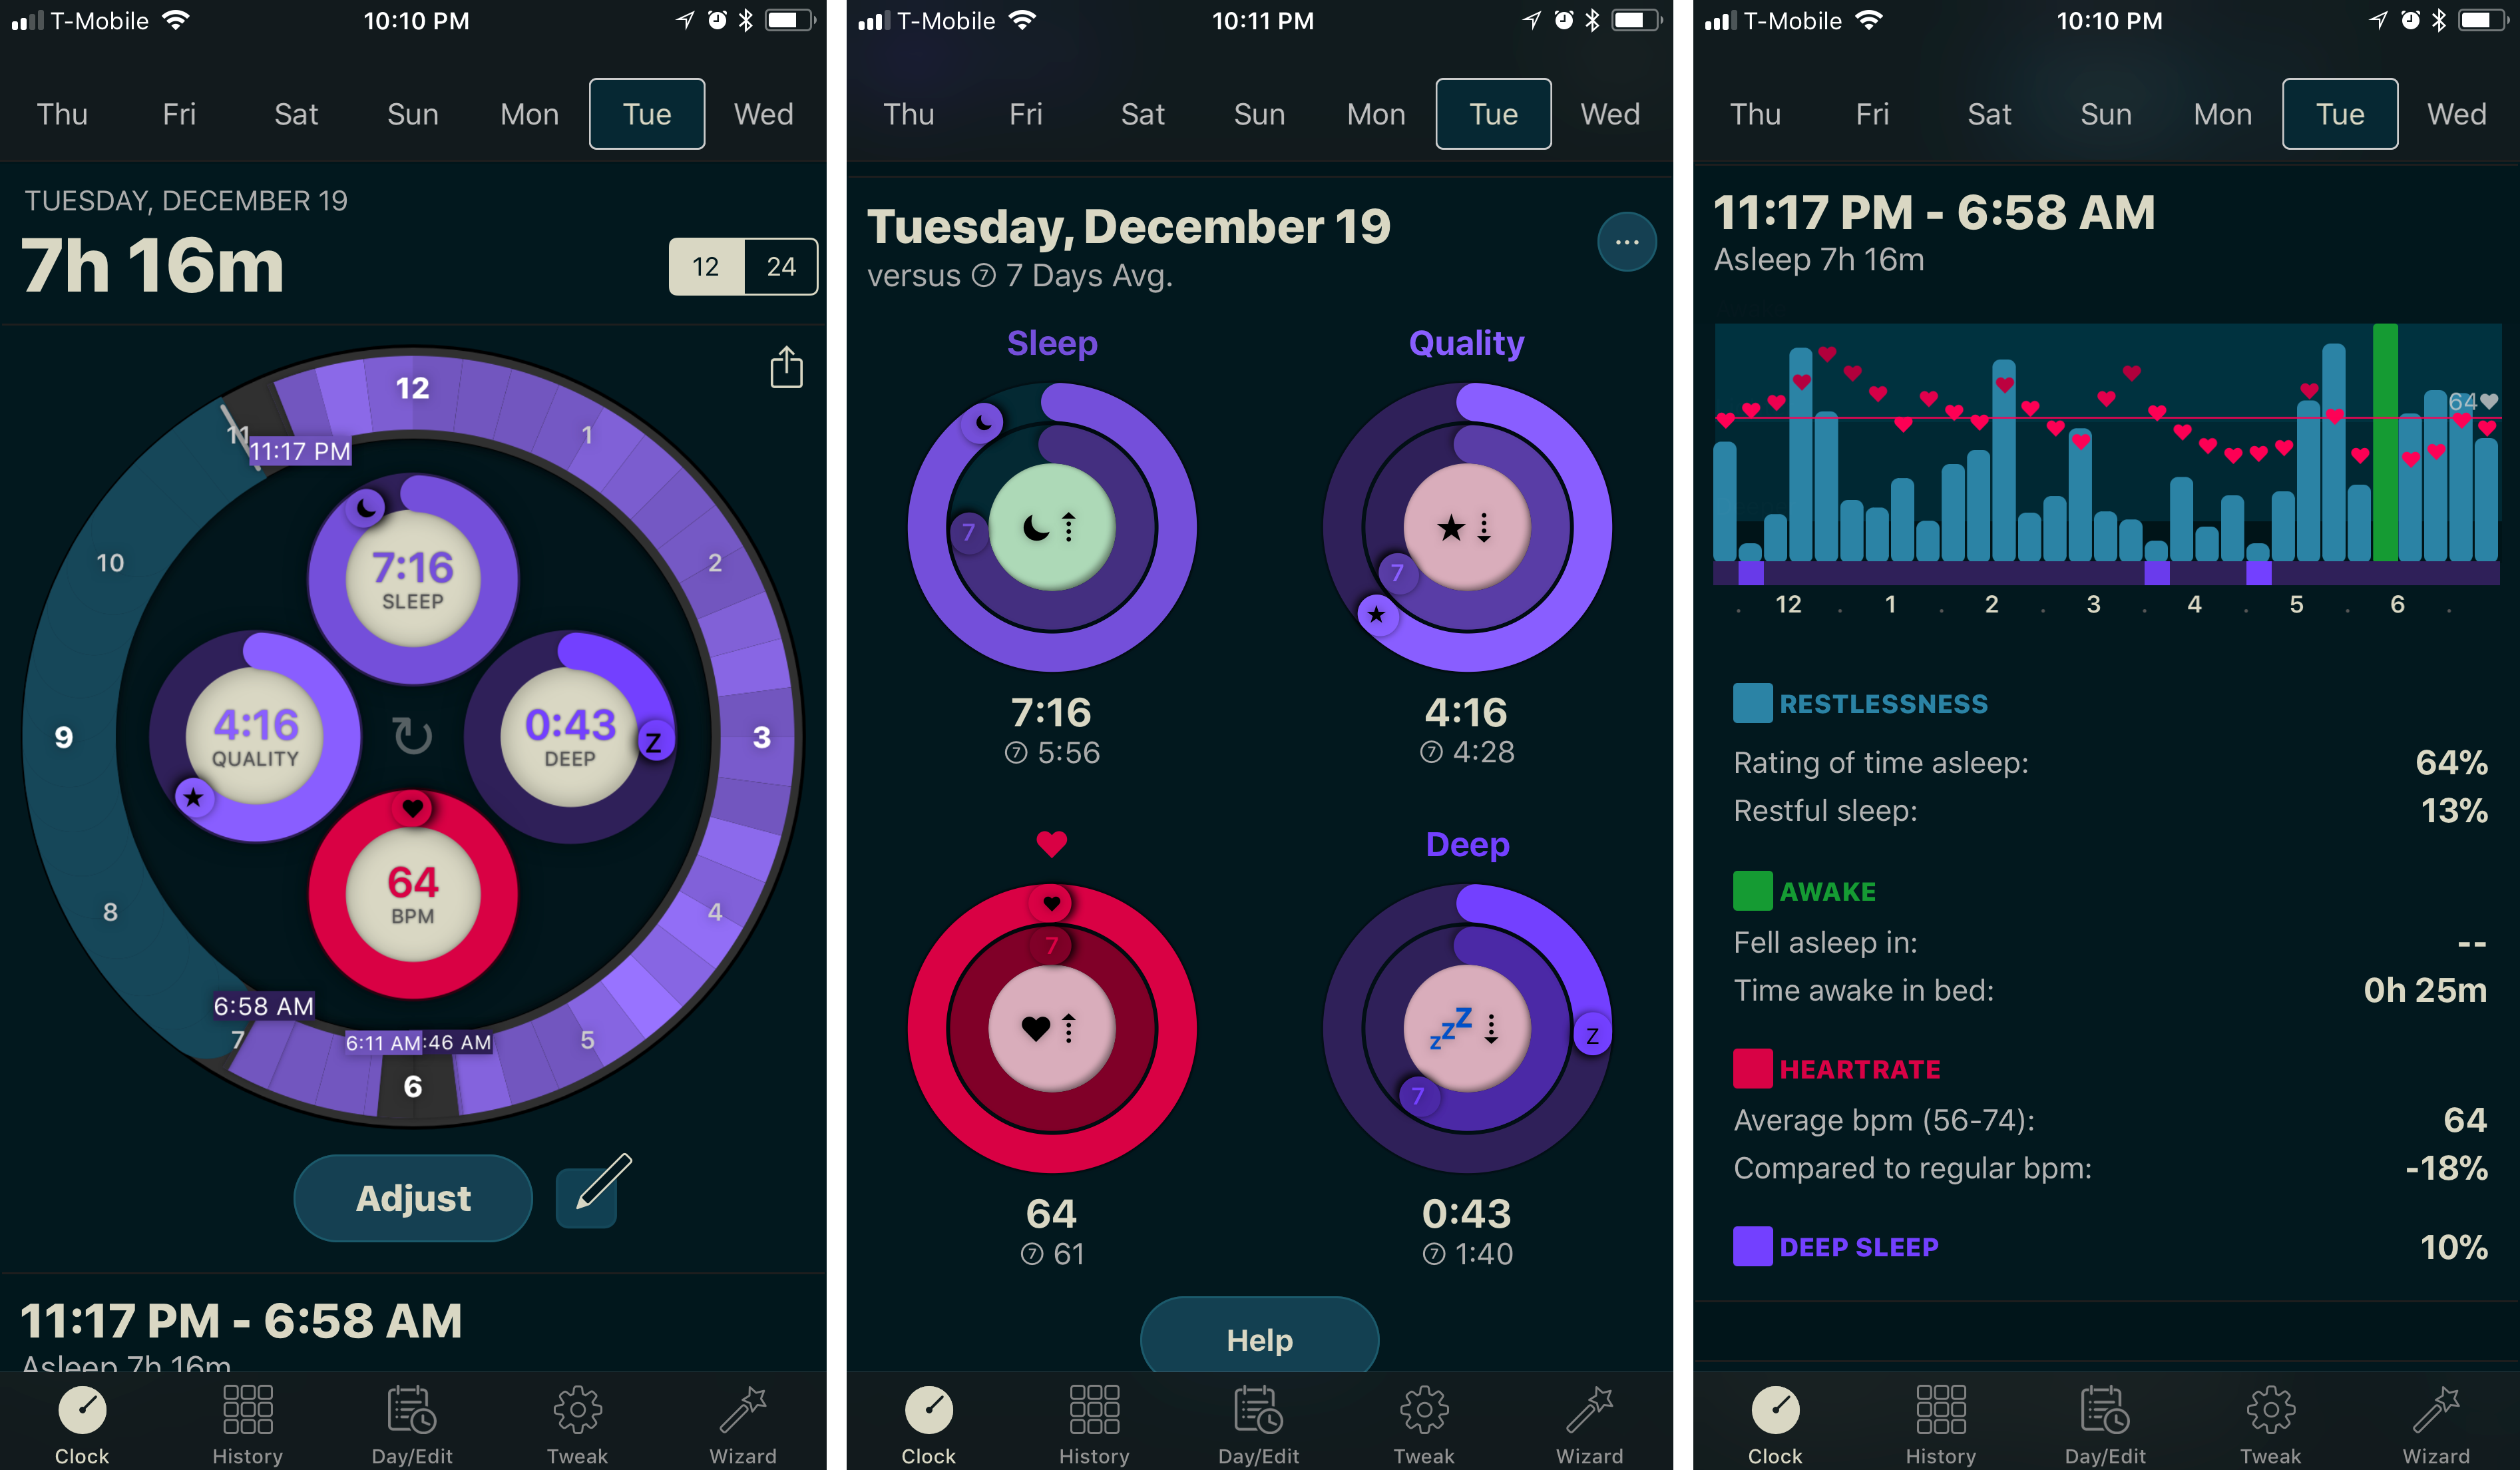 AutoSleep is Far and Away the Best Way for Apple Watch Users to Track